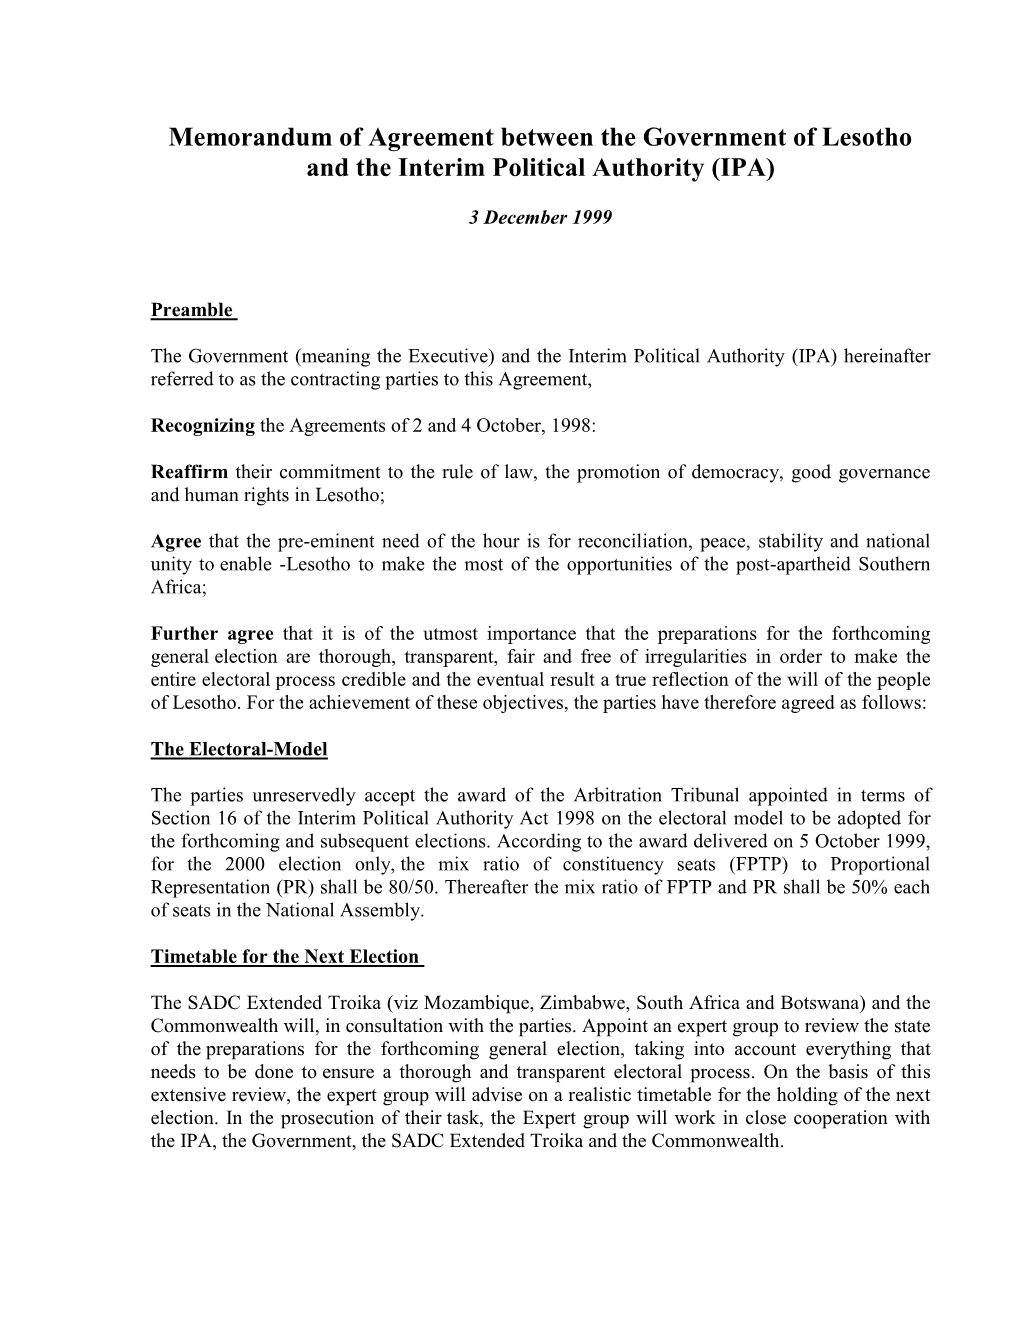 LS 991203 Mou Between the Government of Lesotho and IPA.Pdf